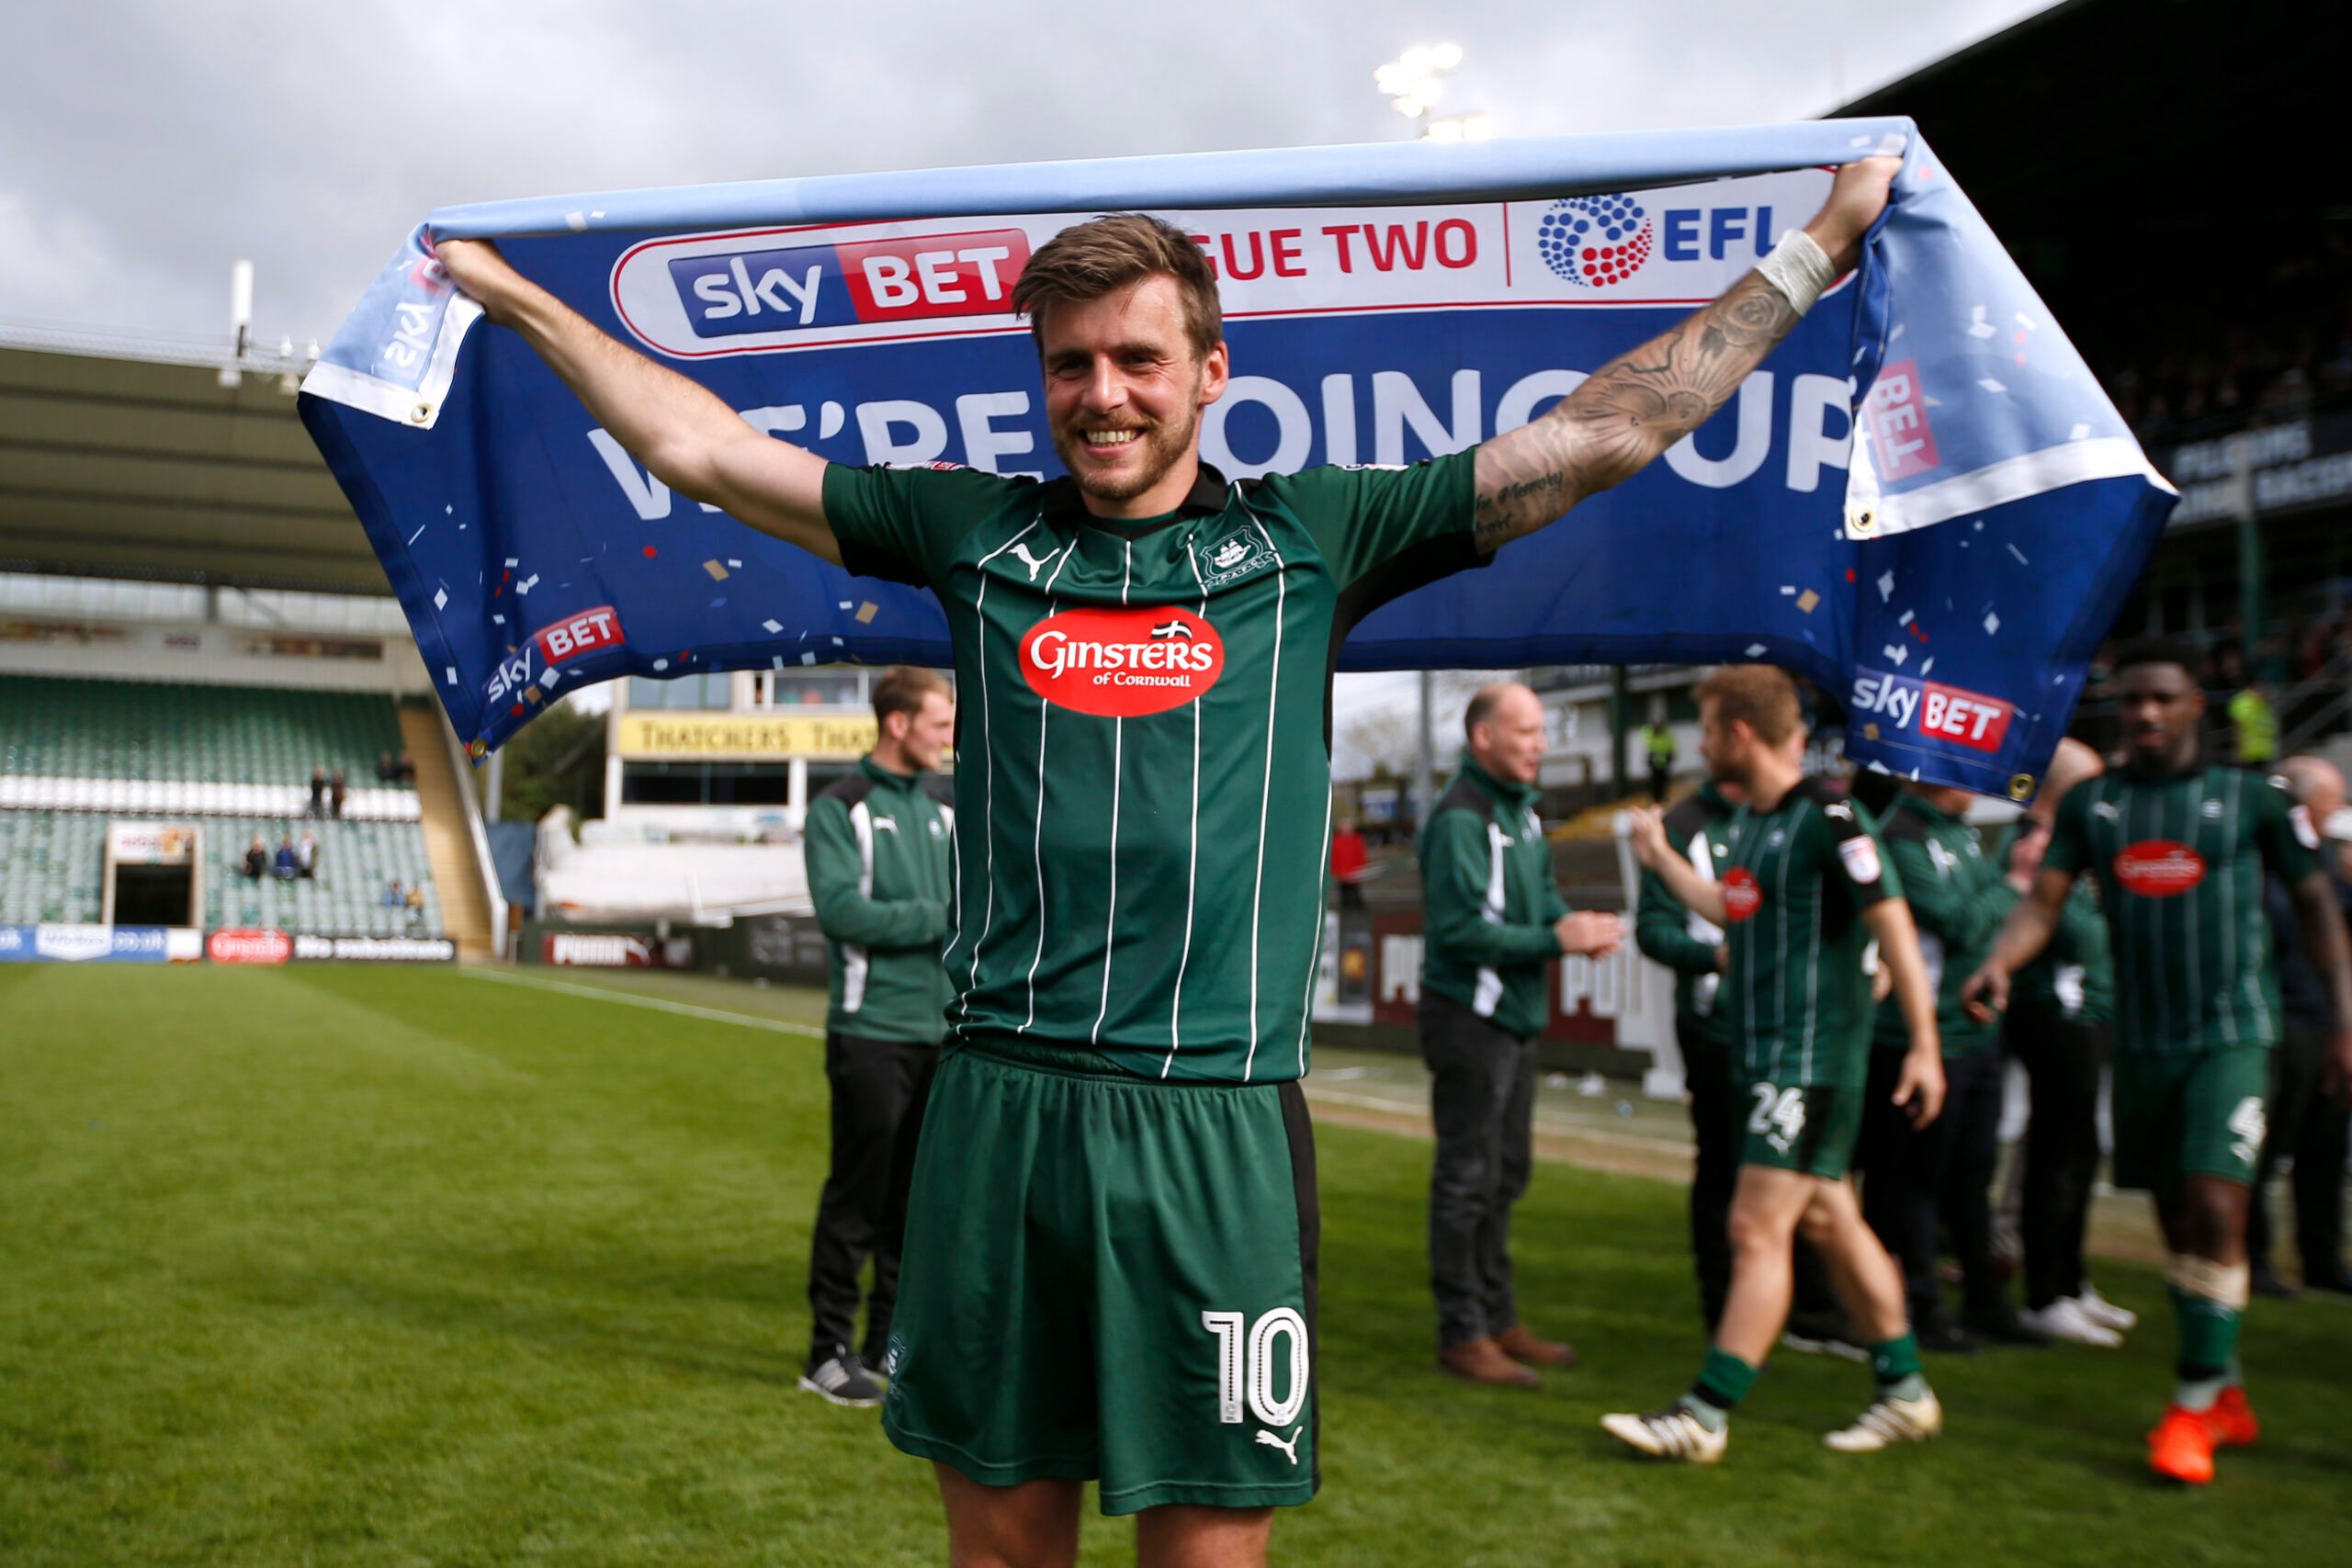 Britain Football Soccer - Plymouth Argyle v Newport County - Sky Bet League Two - Home Park - 17/4/17 Plymouth's Graham Carey celebrates after getting promoted to Sky Bet League One Mandatory Credit: Action Images / Paul Childs Livepic EDITORIAL USE ONLY. No use with unauthorized audio, video, data, fixture lists, club/league logos or 